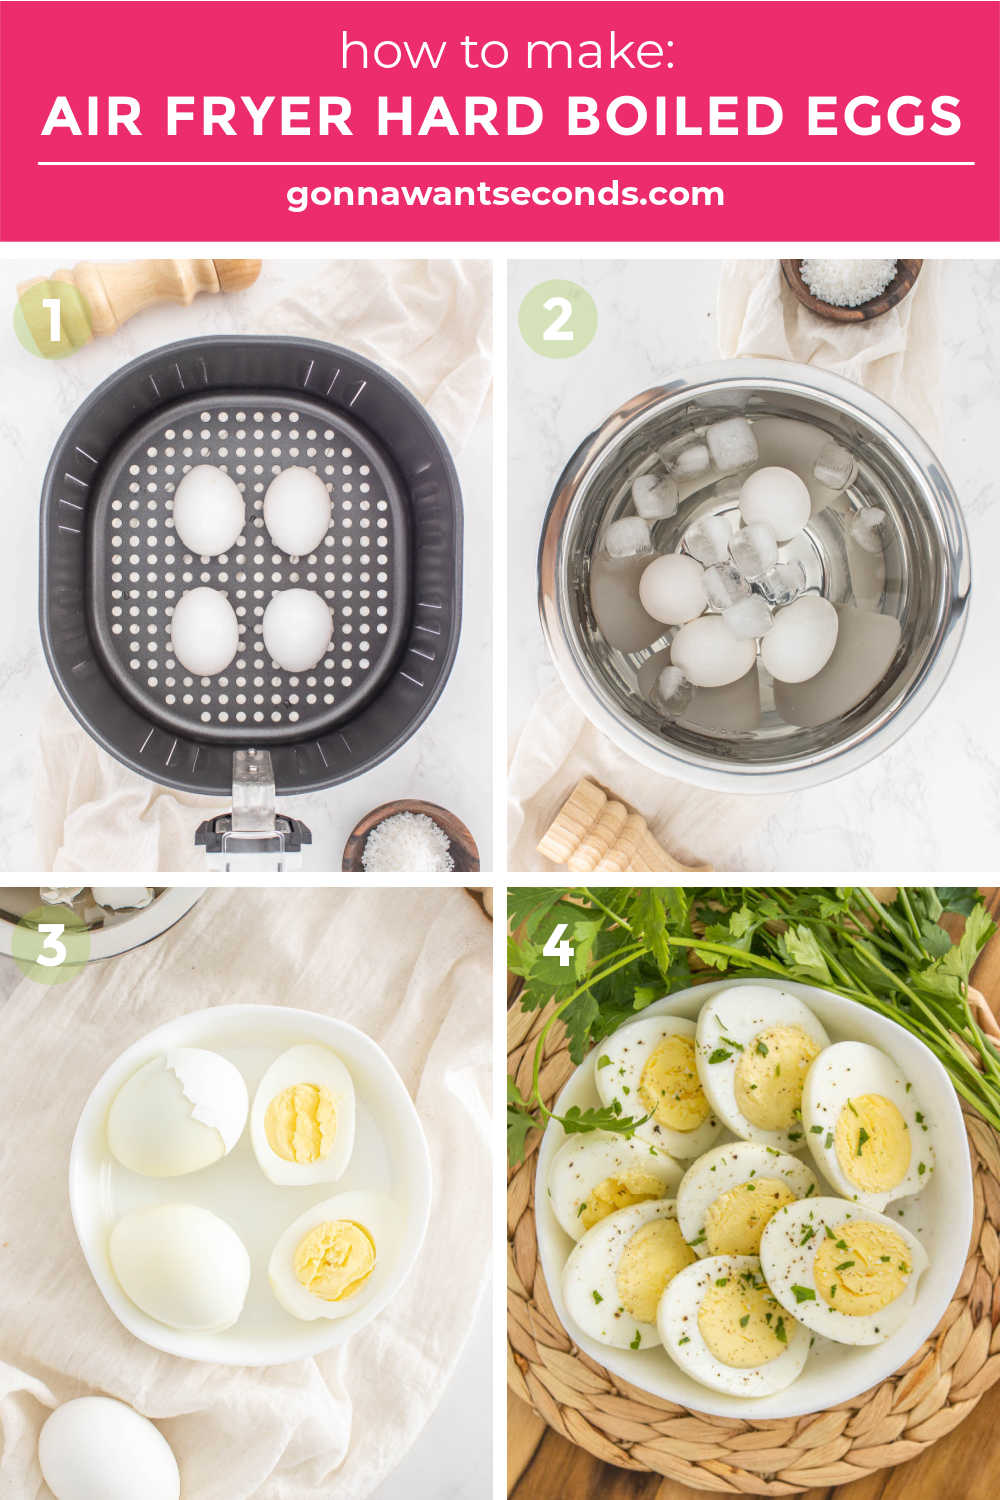 step by step how to make air fryer hard boiled eggs 